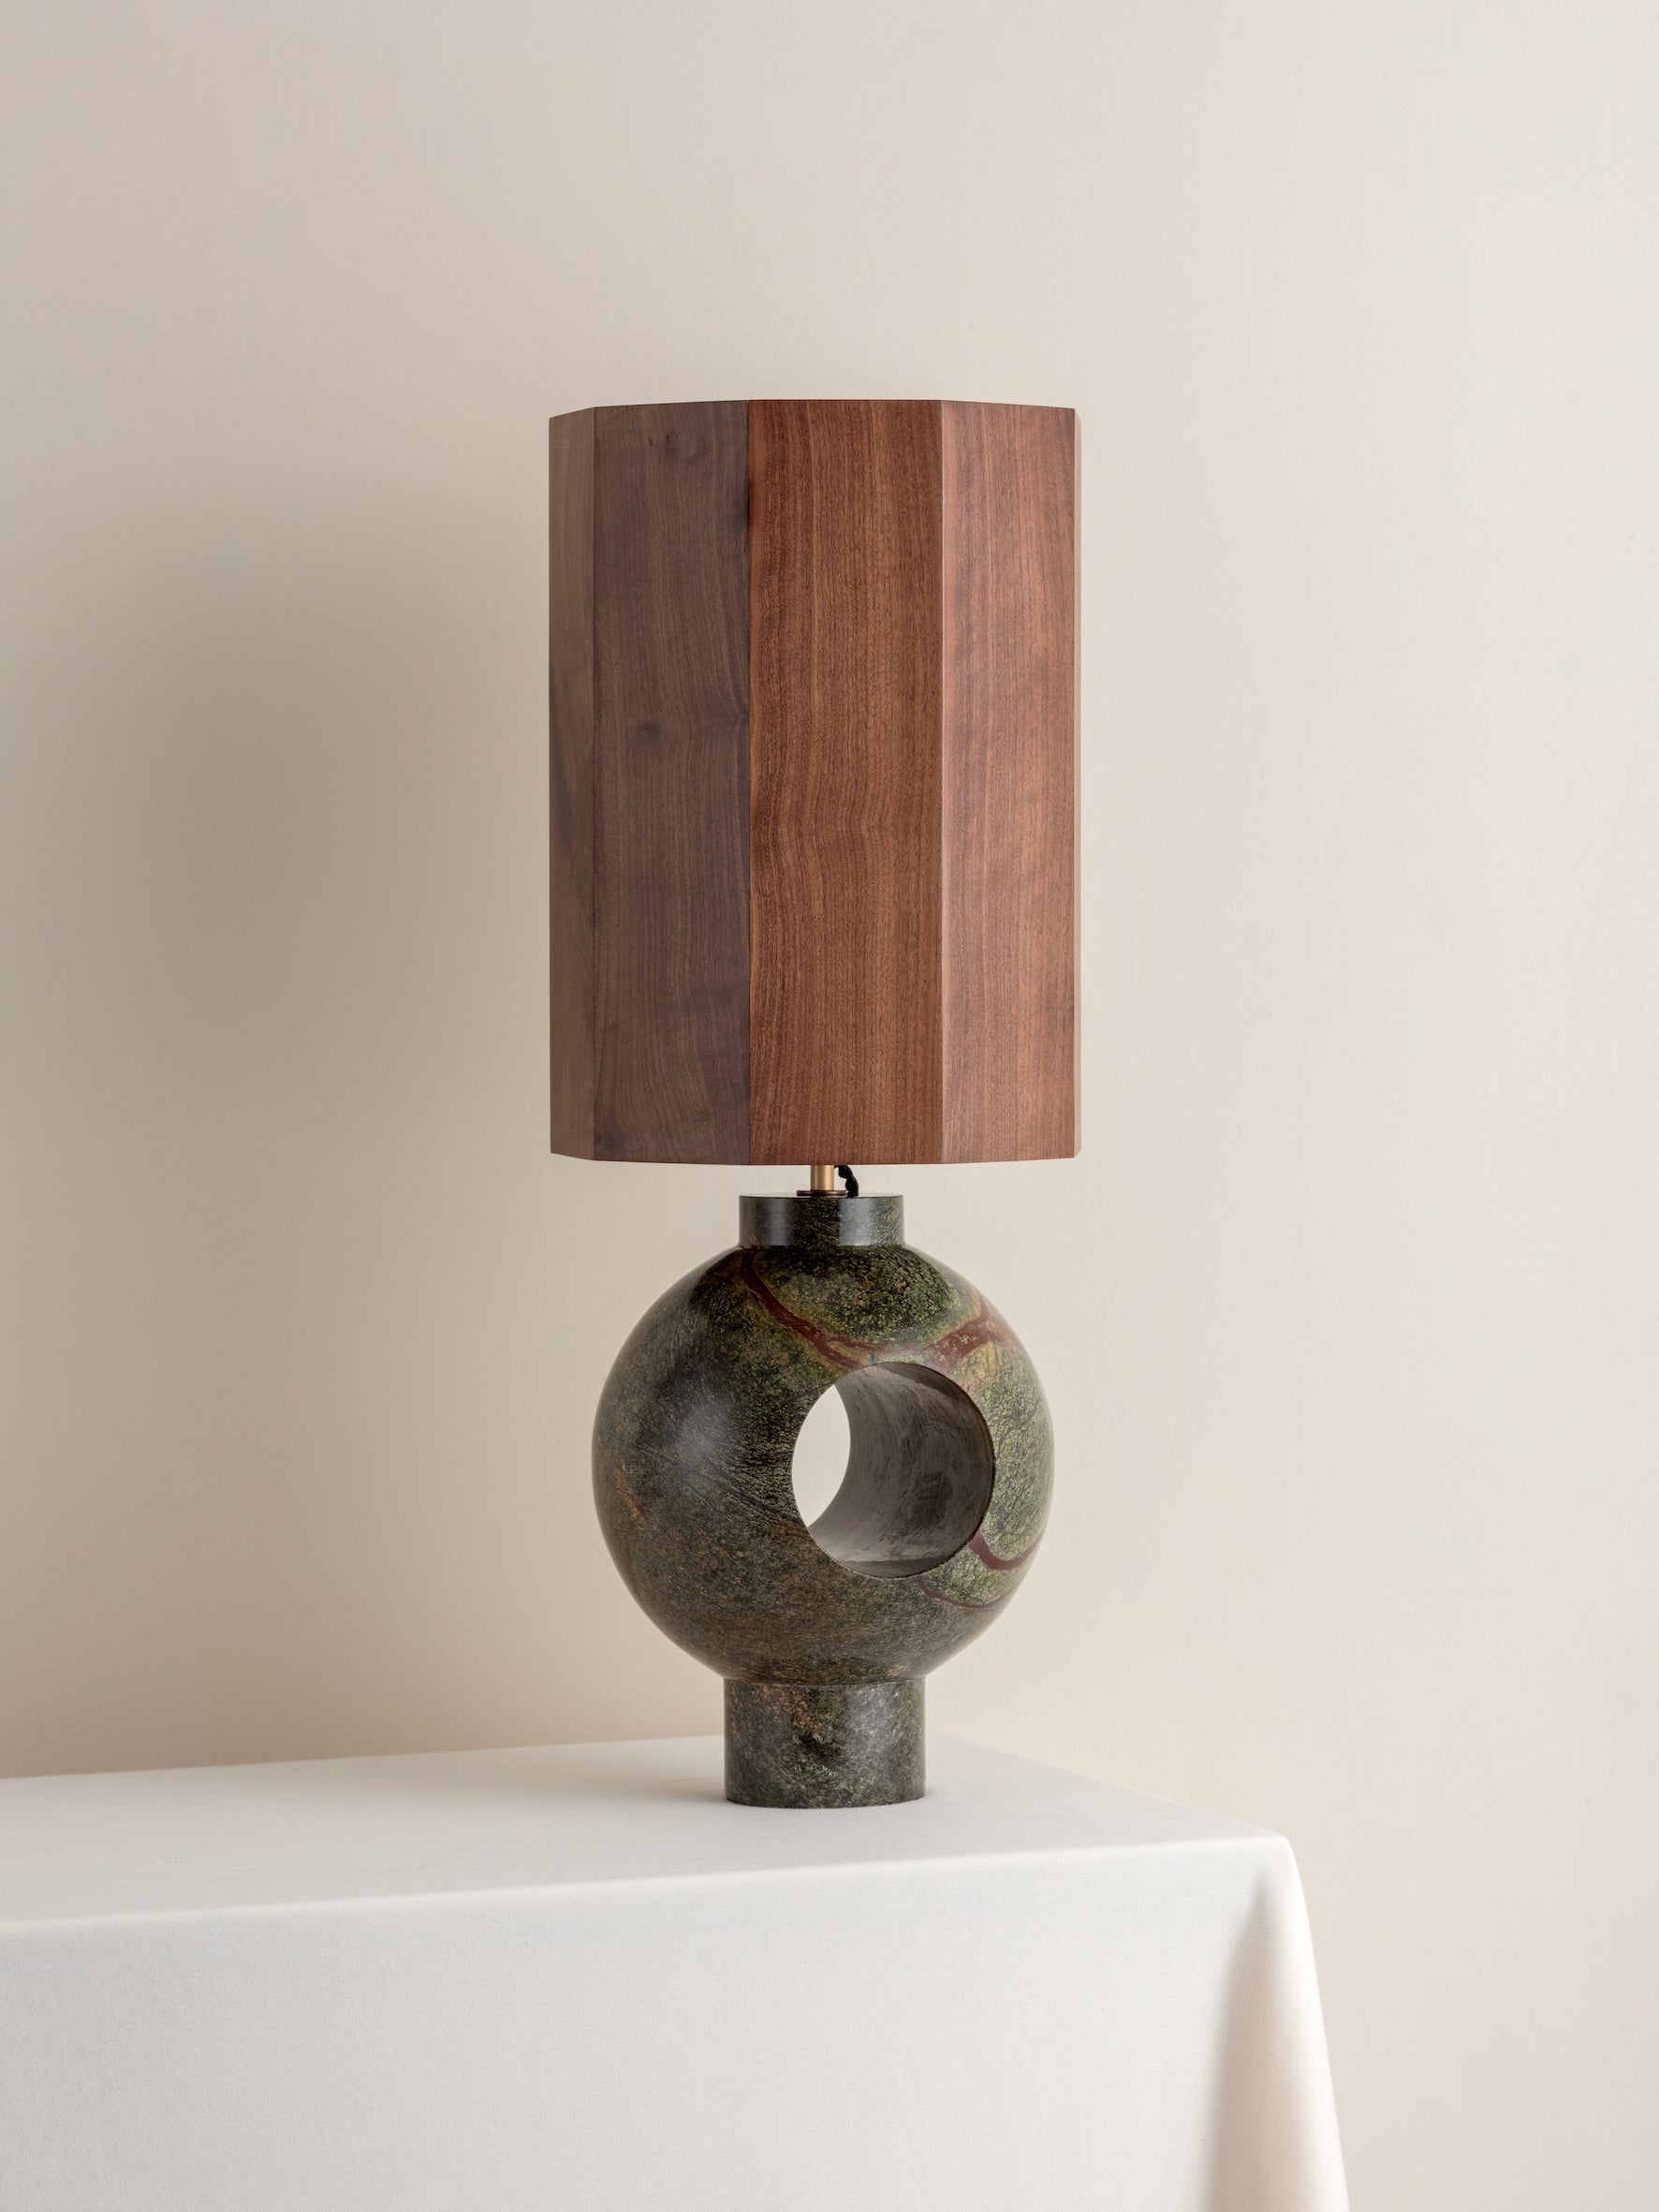 Editions marble lamp with + walnut wood shade | Table Lamp | Lights & Lamps | UK | Modern Affordable Designer Lighting